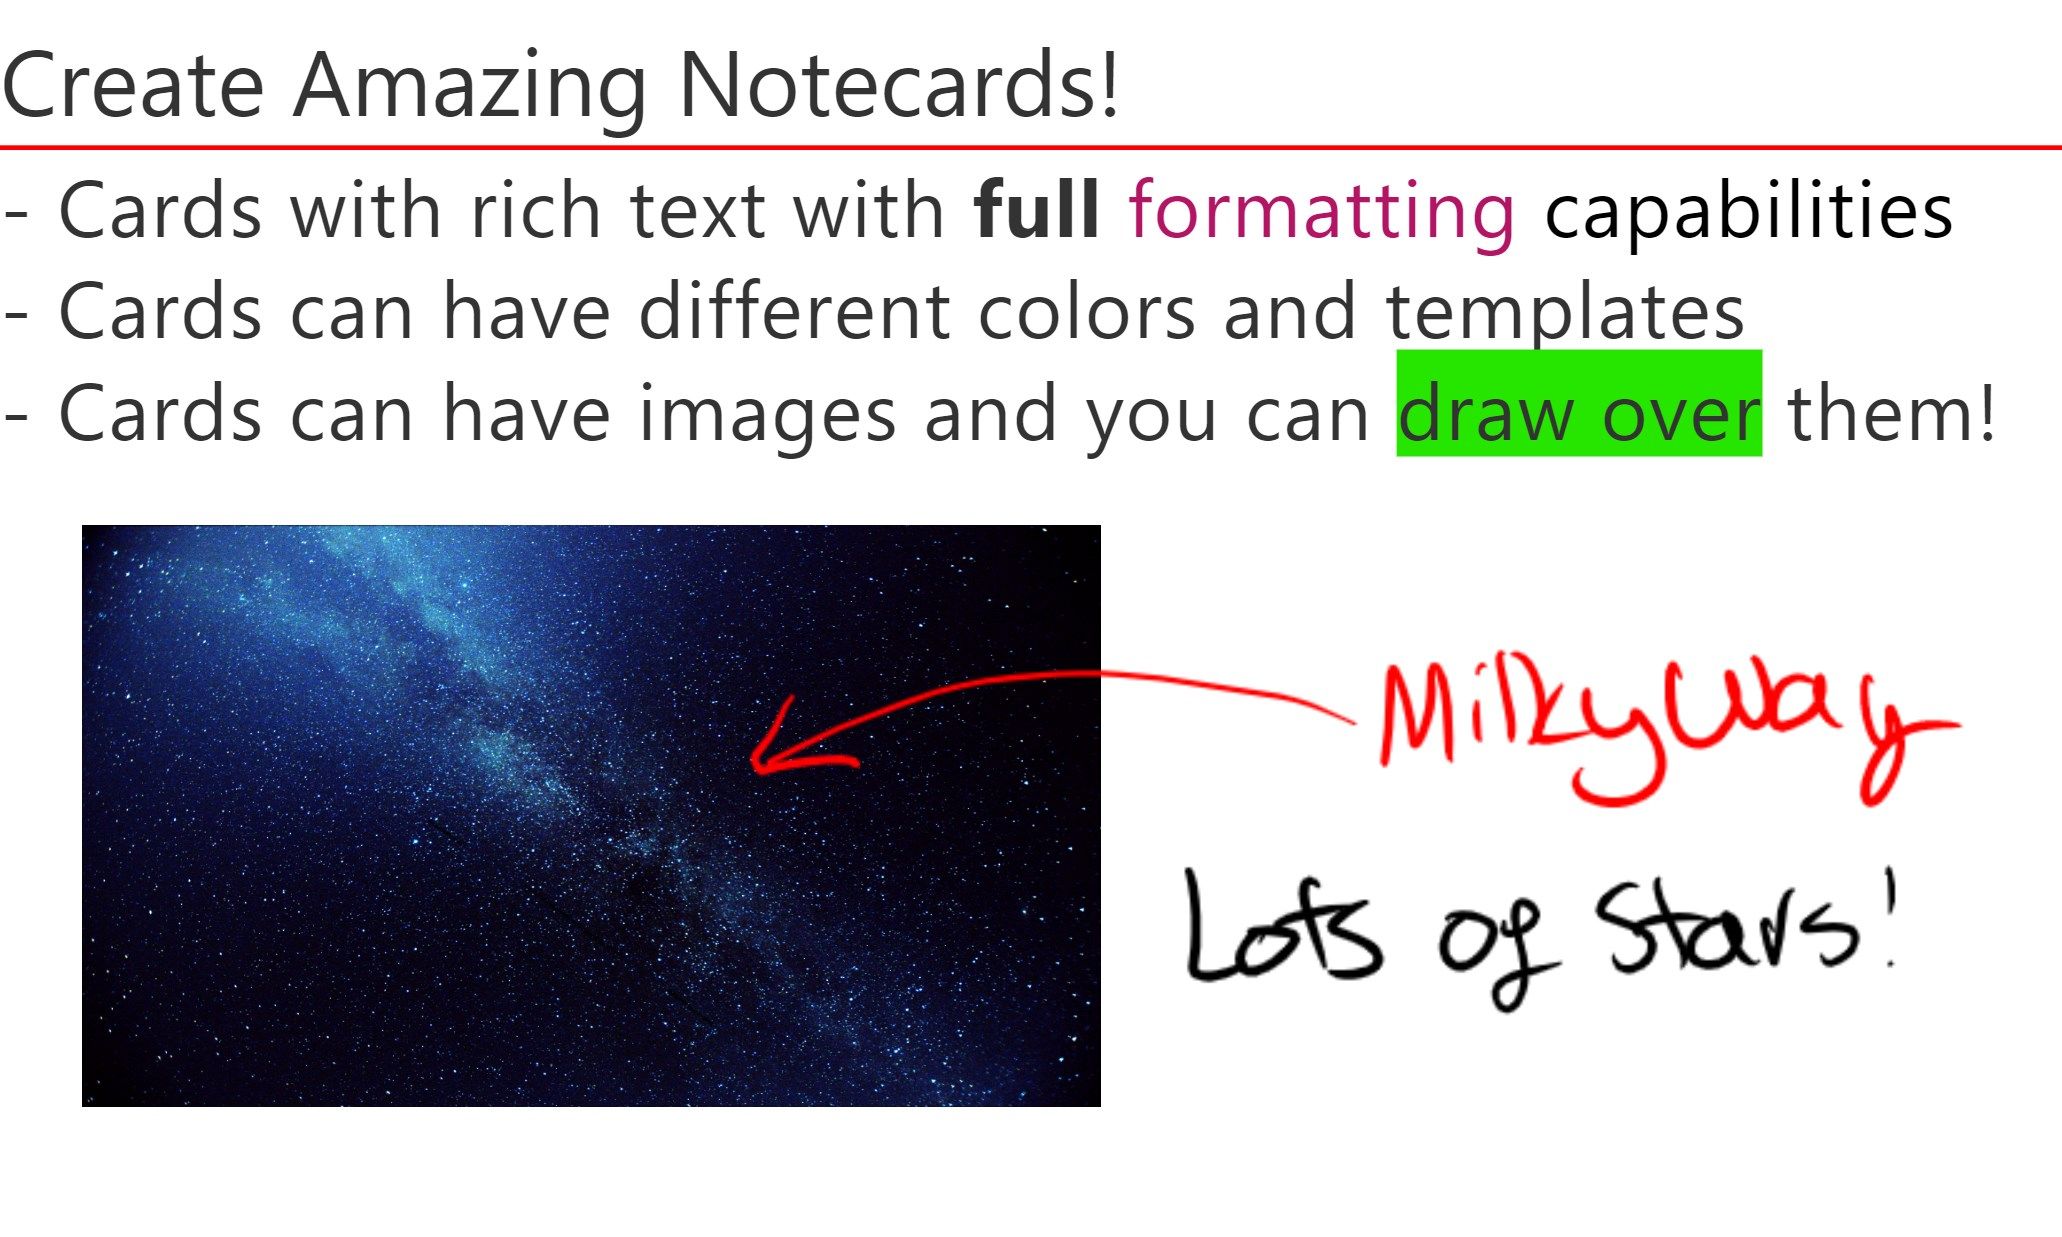 NoteDex has the most advanced card editing engine supporting text, ink, images and tables